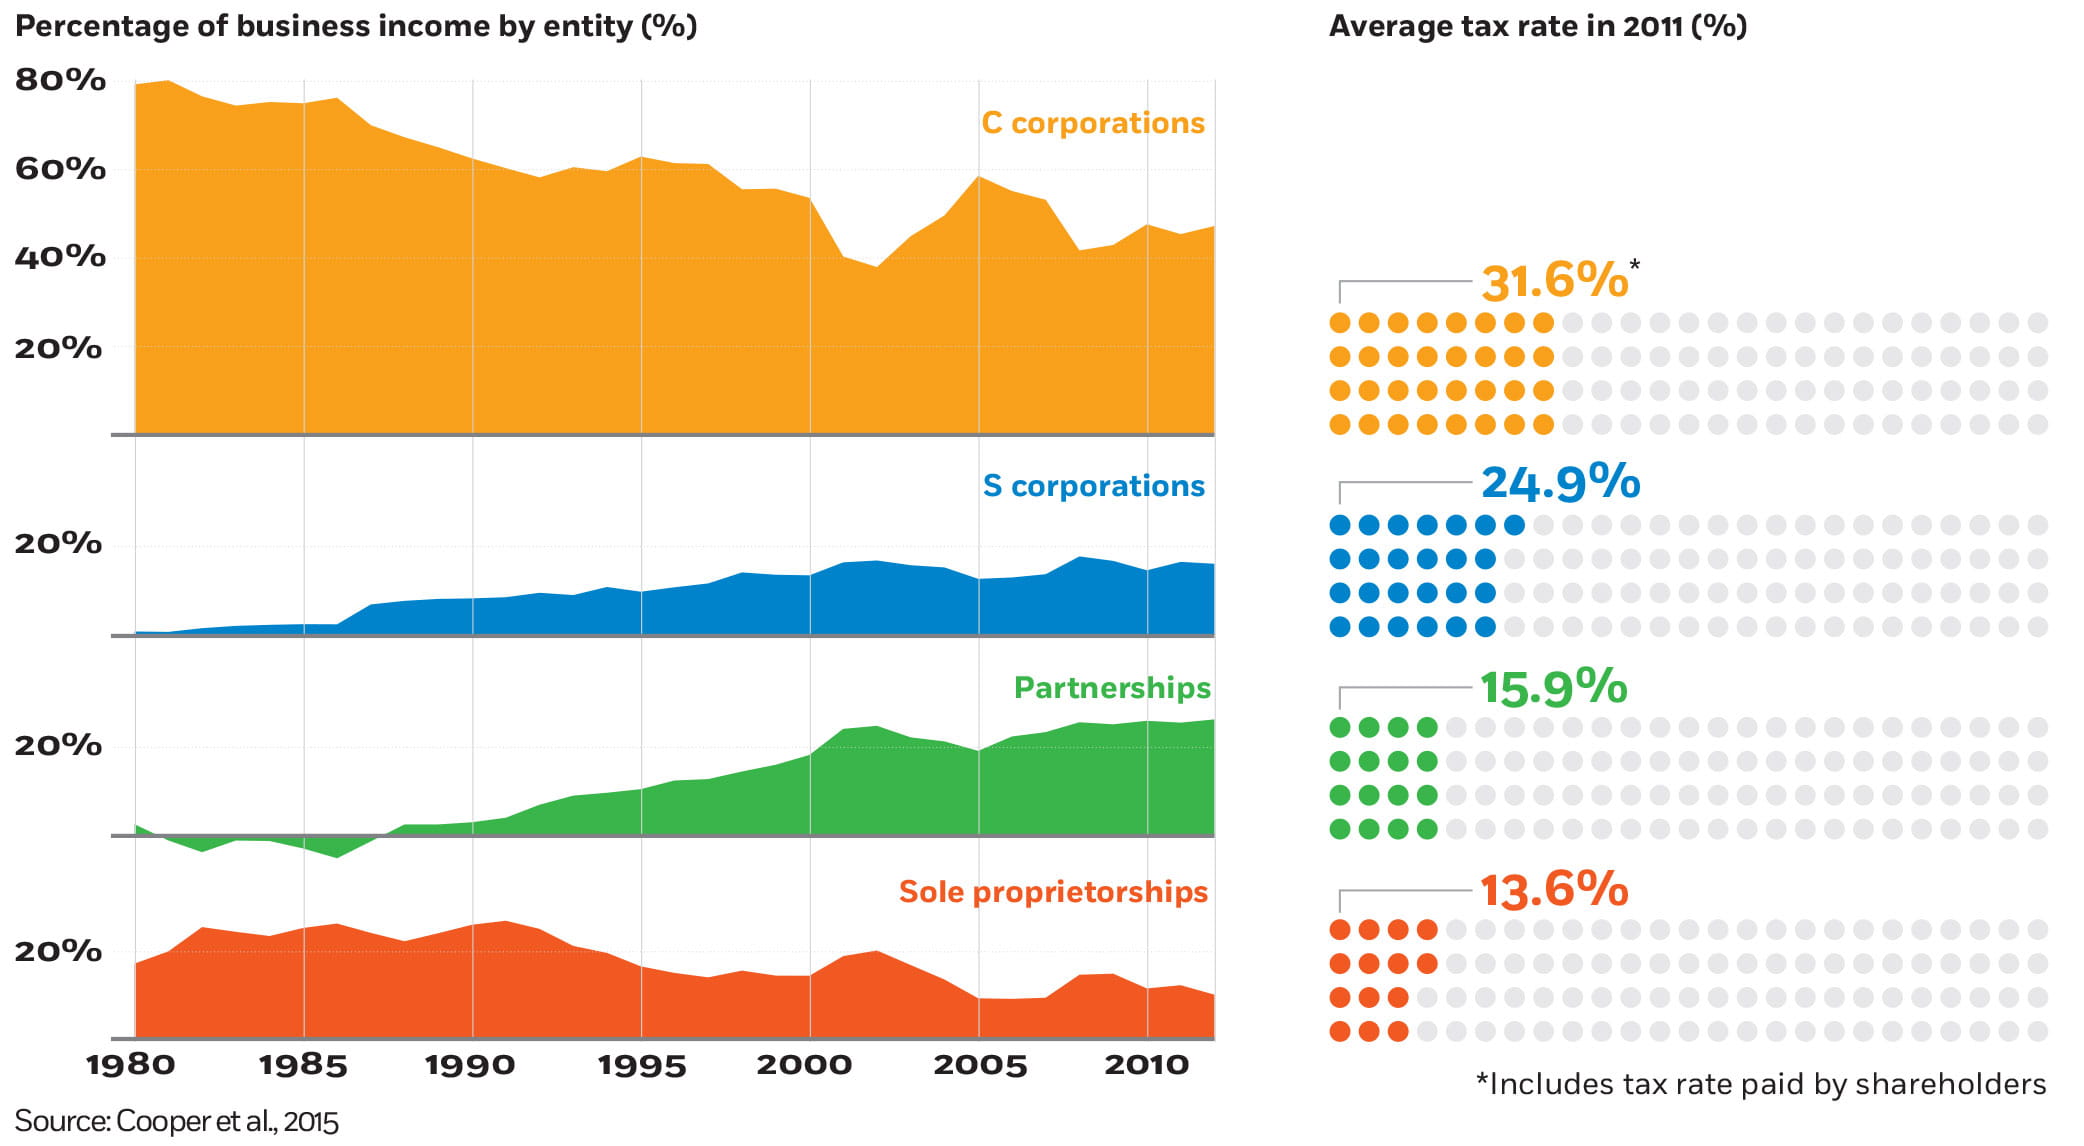 Four area charts plotting the share of business income for C corporations, S corporations, partnerships, and sole proprietorships, with percentages on the y-axis and the years 1980 to 2011 on the x-axis. A companion chart plots the four entities’ average tax rates in 2011. C corporations, with a tax rate of thirty-one-point-six percent, which includes the tax rate paid by shareholders, started at eighty percent of business income in 1980 and feel to about forty-five percent in 2011. S corporations, with a smaller tax rate of twenty-four-point-nine percent, started at about one percent of business income and rose to eighteen percent. Partnerships, with a lower tax rate of fifteen-point-nine percent, also started at one percent and rose to twenty-four. And sole proprietorships, with a lower tax rate of thirteen-point-six percent, started at 19 percent of business income and declined to ten.